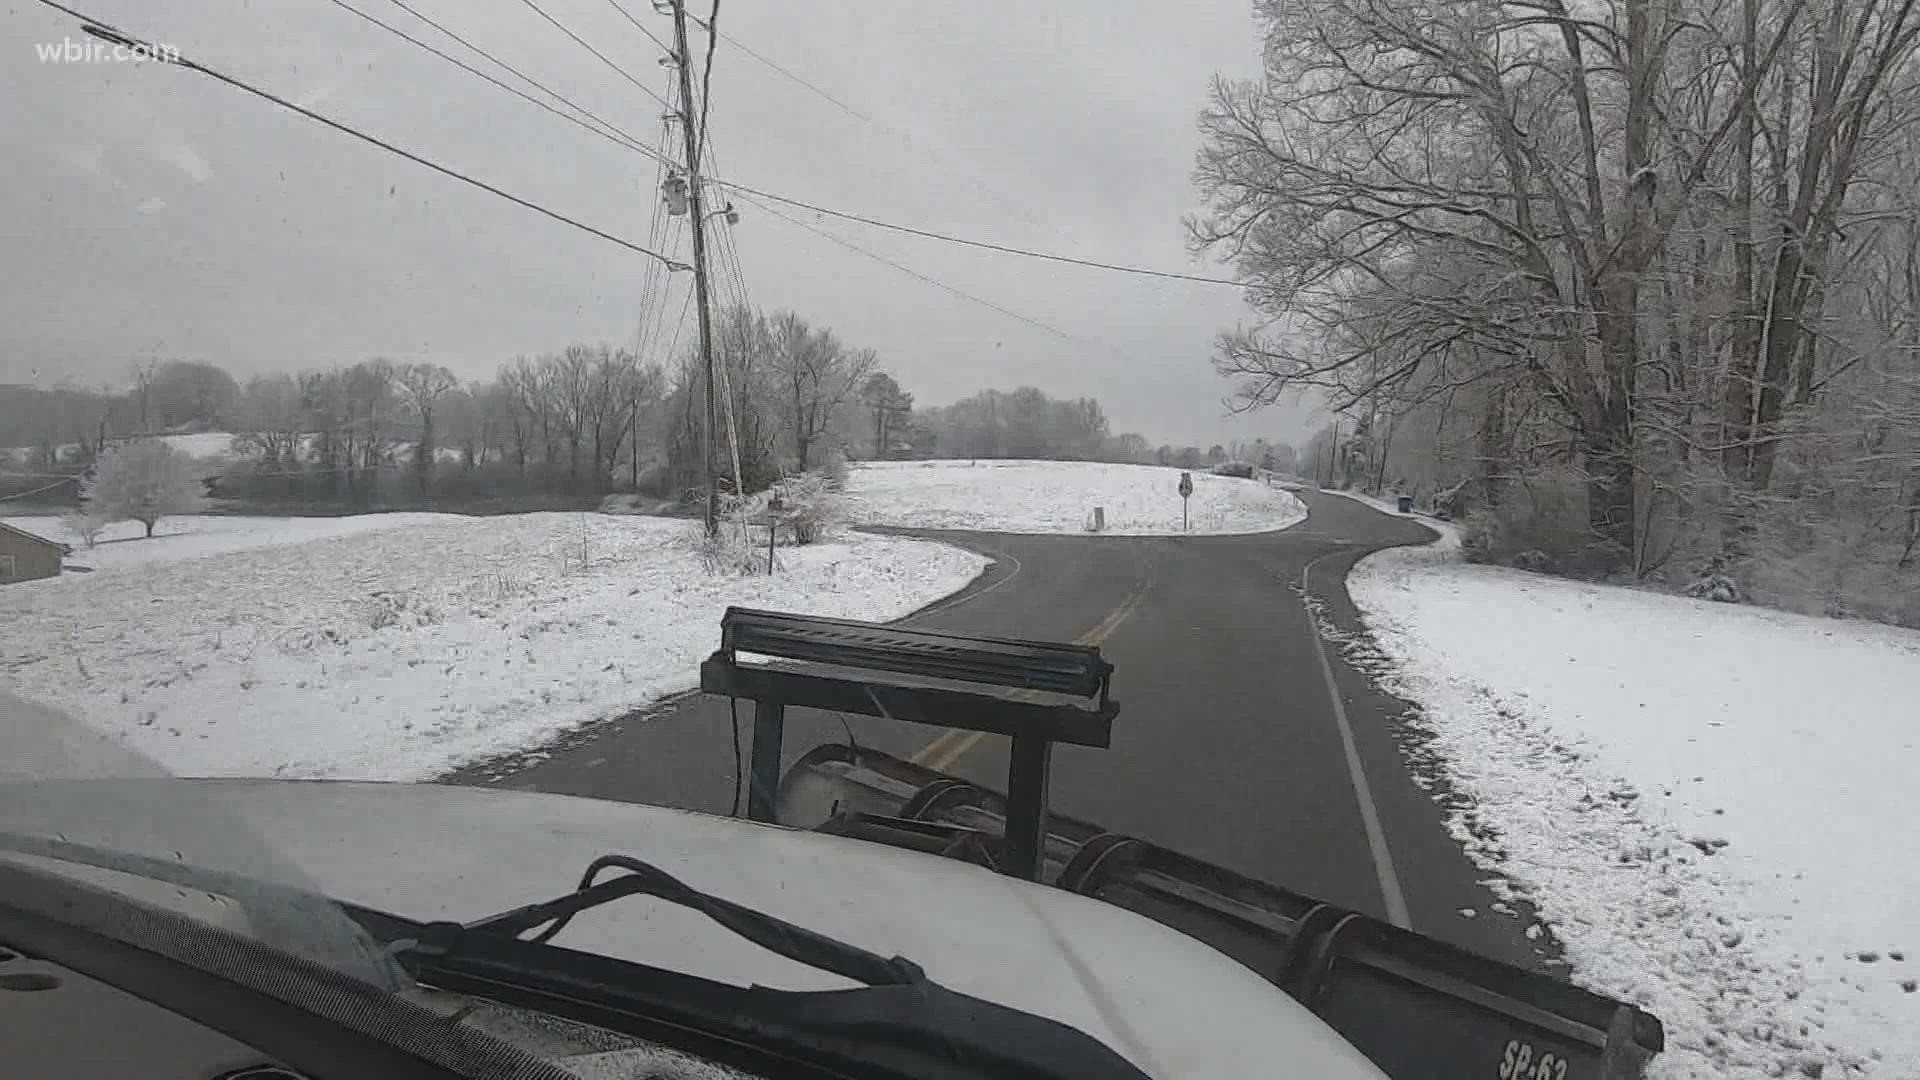 Road crews warn roads could potentially re-freeze over night as temps drop down to freezing again.